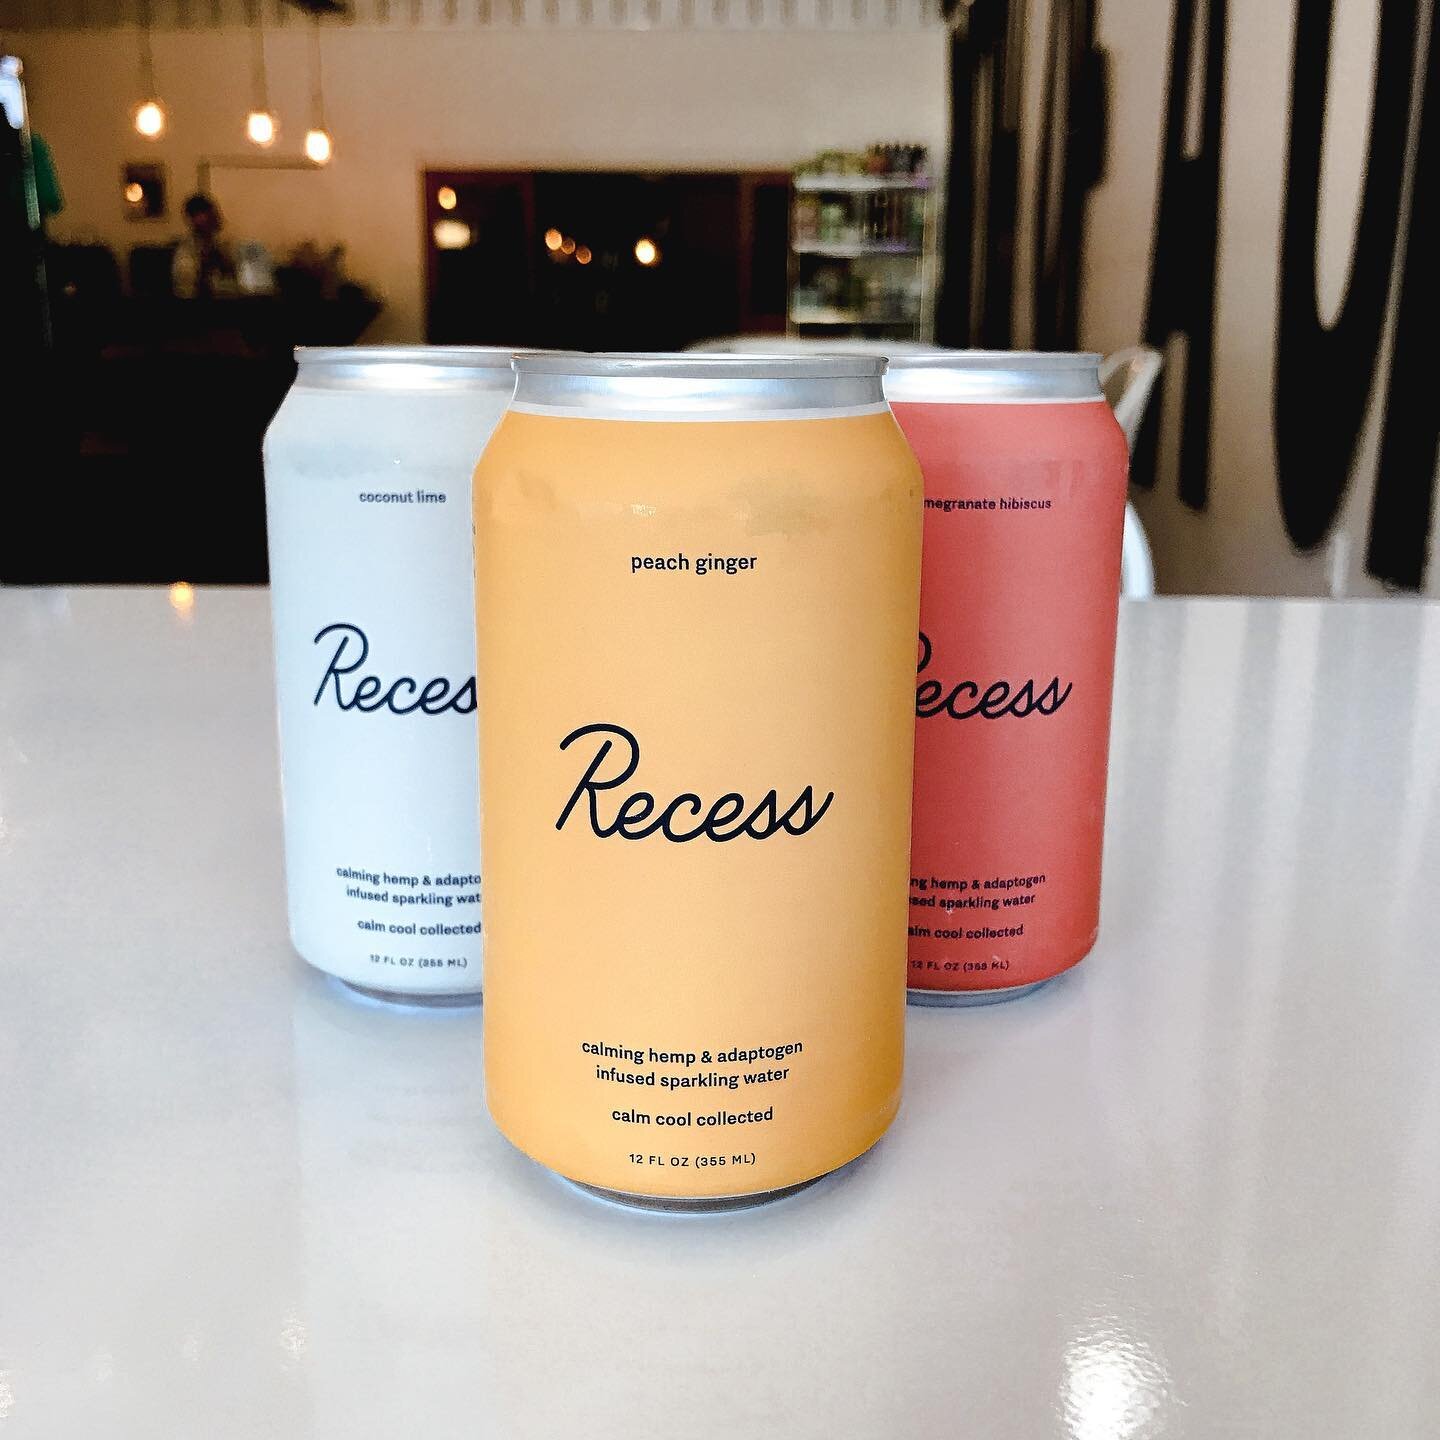 New product alert ✨

Recess is a sparkling water infused with hemp and adaptogens, made with real fruit ingredients and no fake stuff.

Leaves you feeling calm, cool, and collected. 😌 @takearecess 

Open till 2pm #DoGoodThings